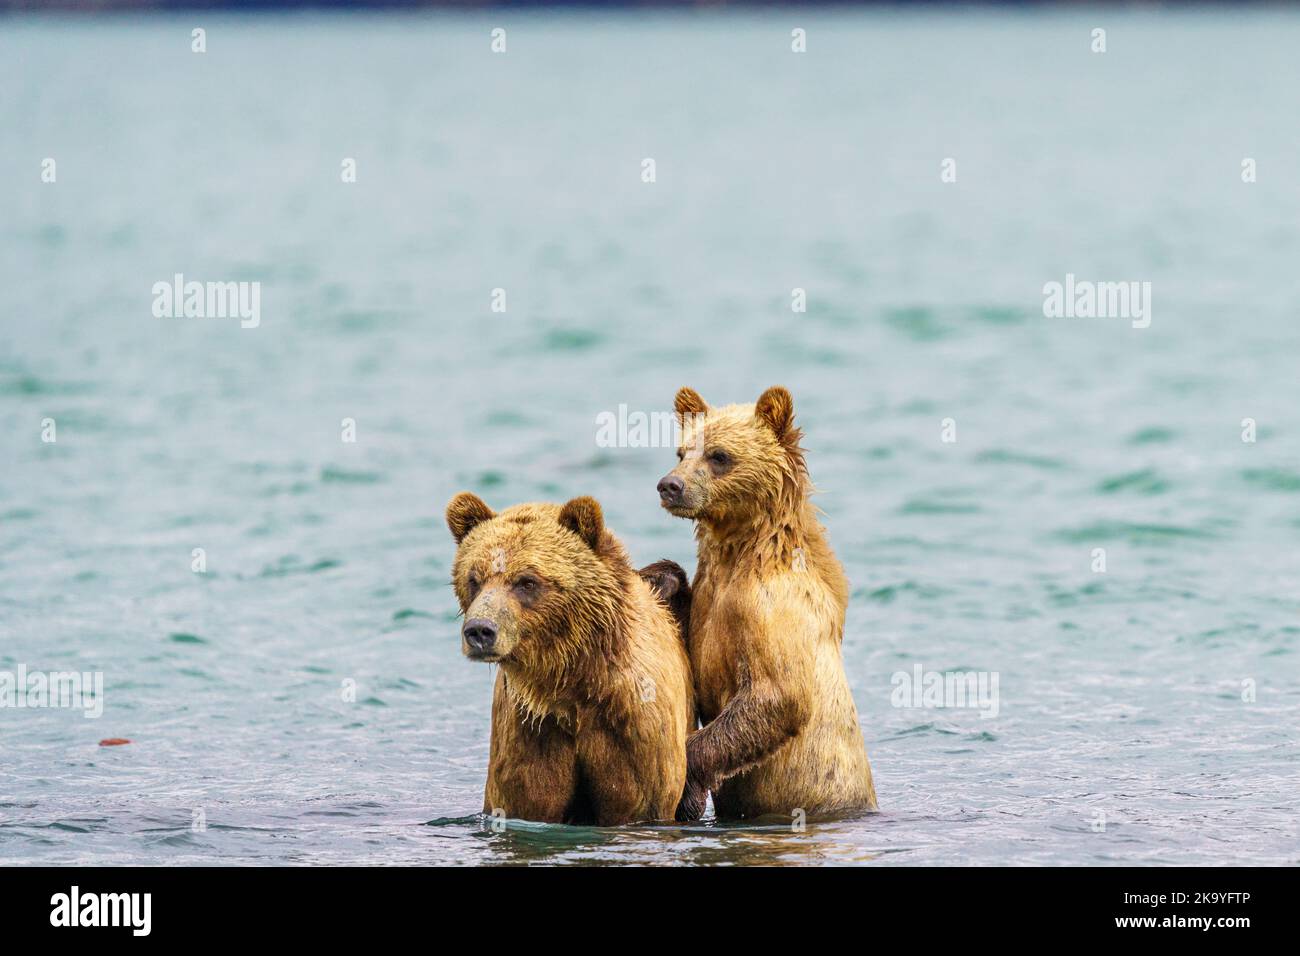 Grizzly bear mom with cub in Knight Inlet, First Nations Territory, British Columbia, Canada Stock Photo